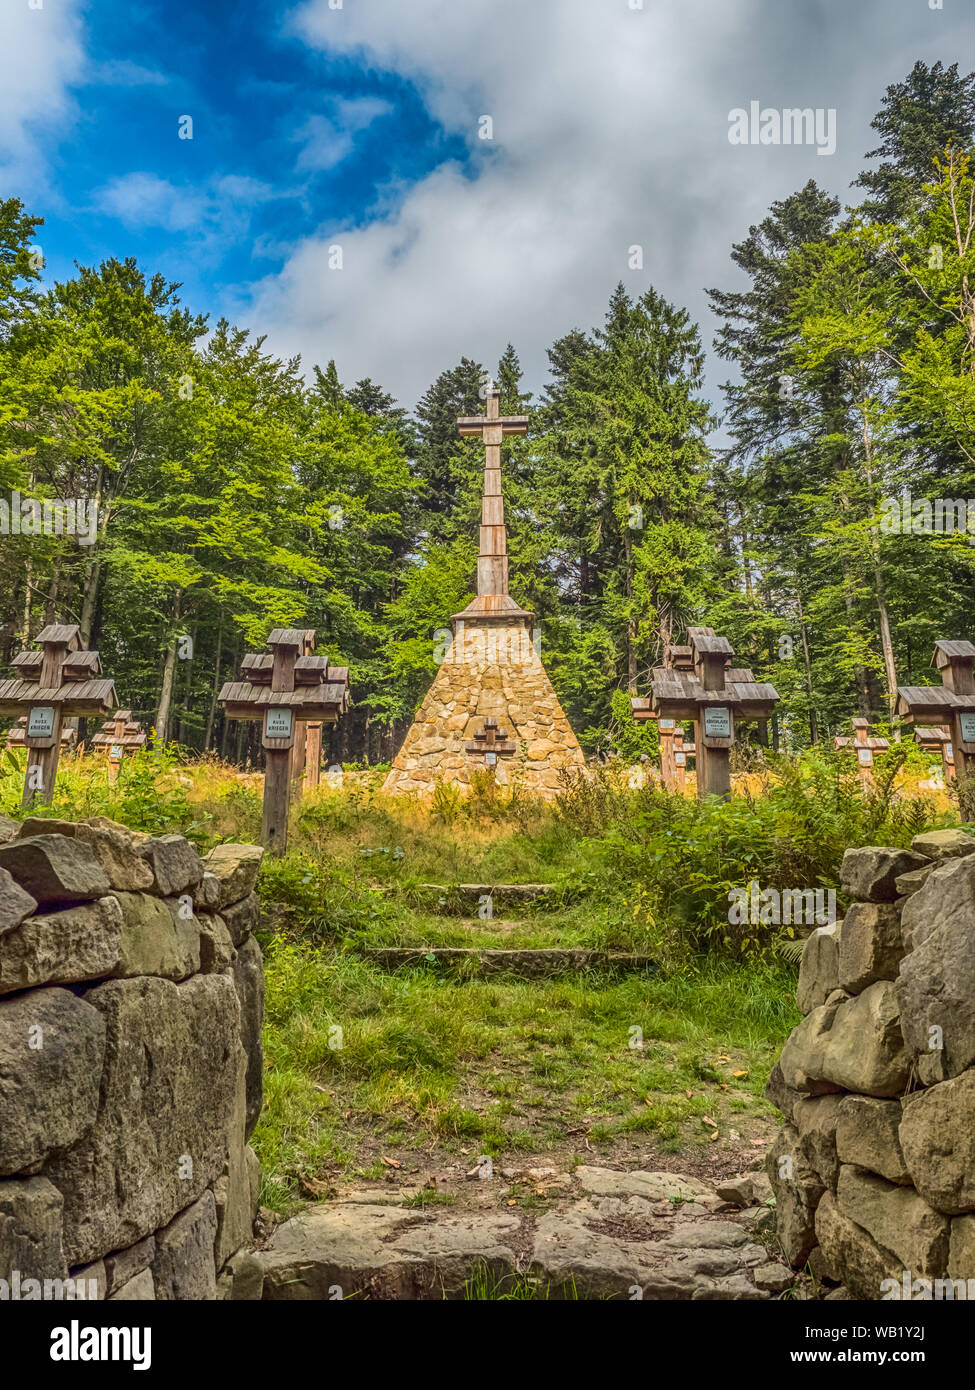 Magura Malastowska, Poland - August 21, 2018:  Burial place of 60 soldiers of the Austro-Hungarian army and 20 Russian armies who died in 1915. I Worl Stock Photo